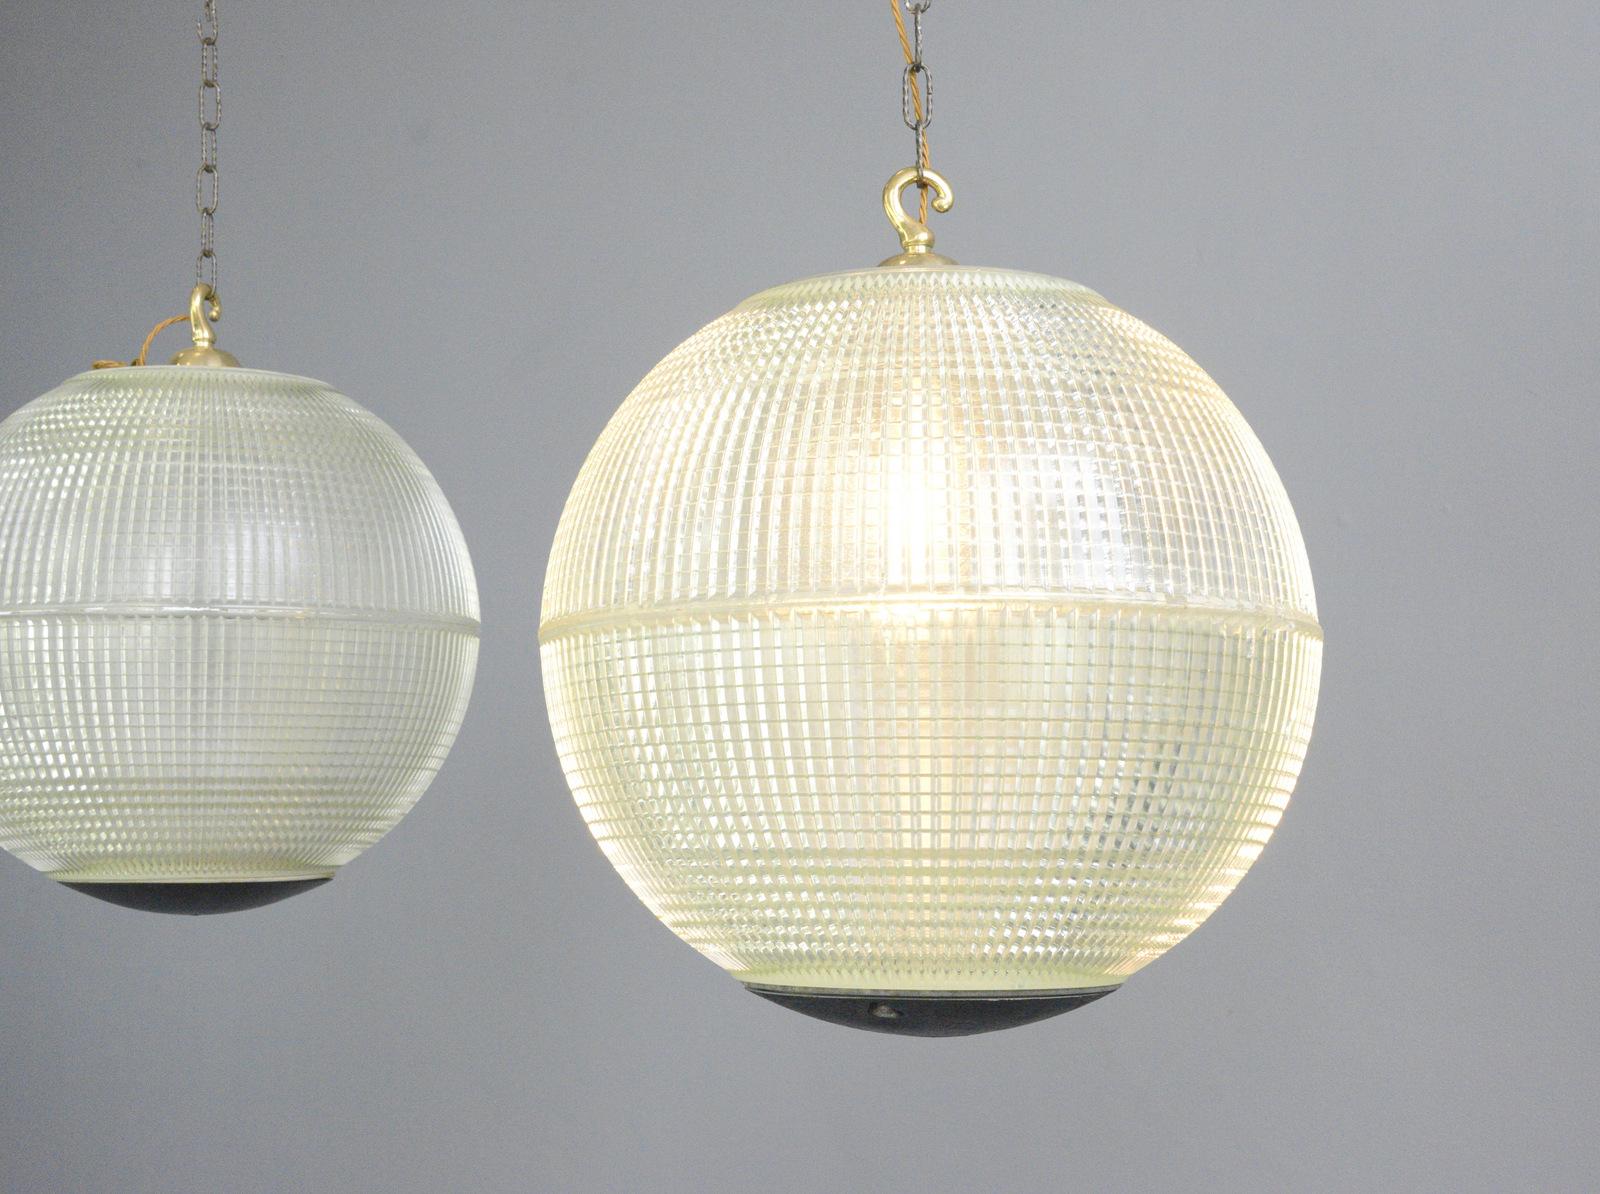 Extra large Parisian Holophane globe lights, circa 1950s

- Price is per light
- Heavy prismatic glass 
- Comes with chain and ceiling hook
- Takes E27 fitting bulbs
- Originally used on the tops of street lamps across Paris
- Made by